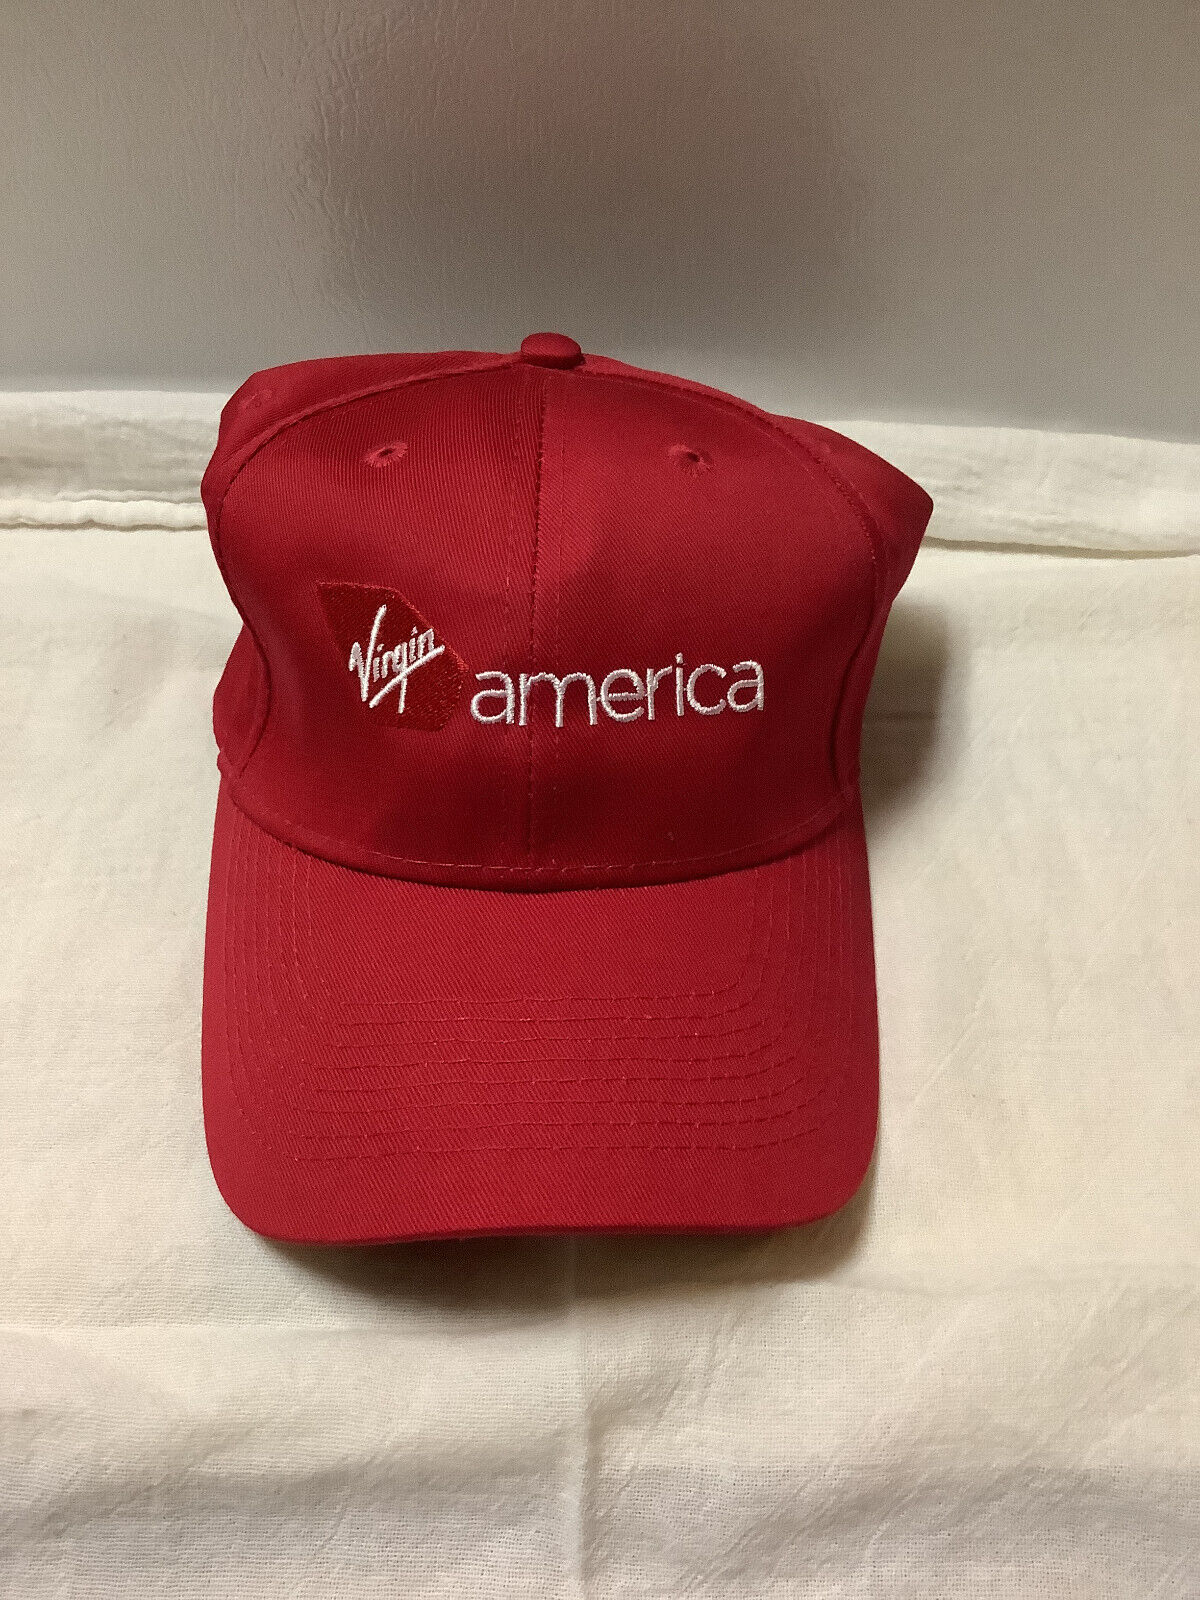 Virgin America Airlines Hat Brand New Alaska Airlines Original issue by VX.